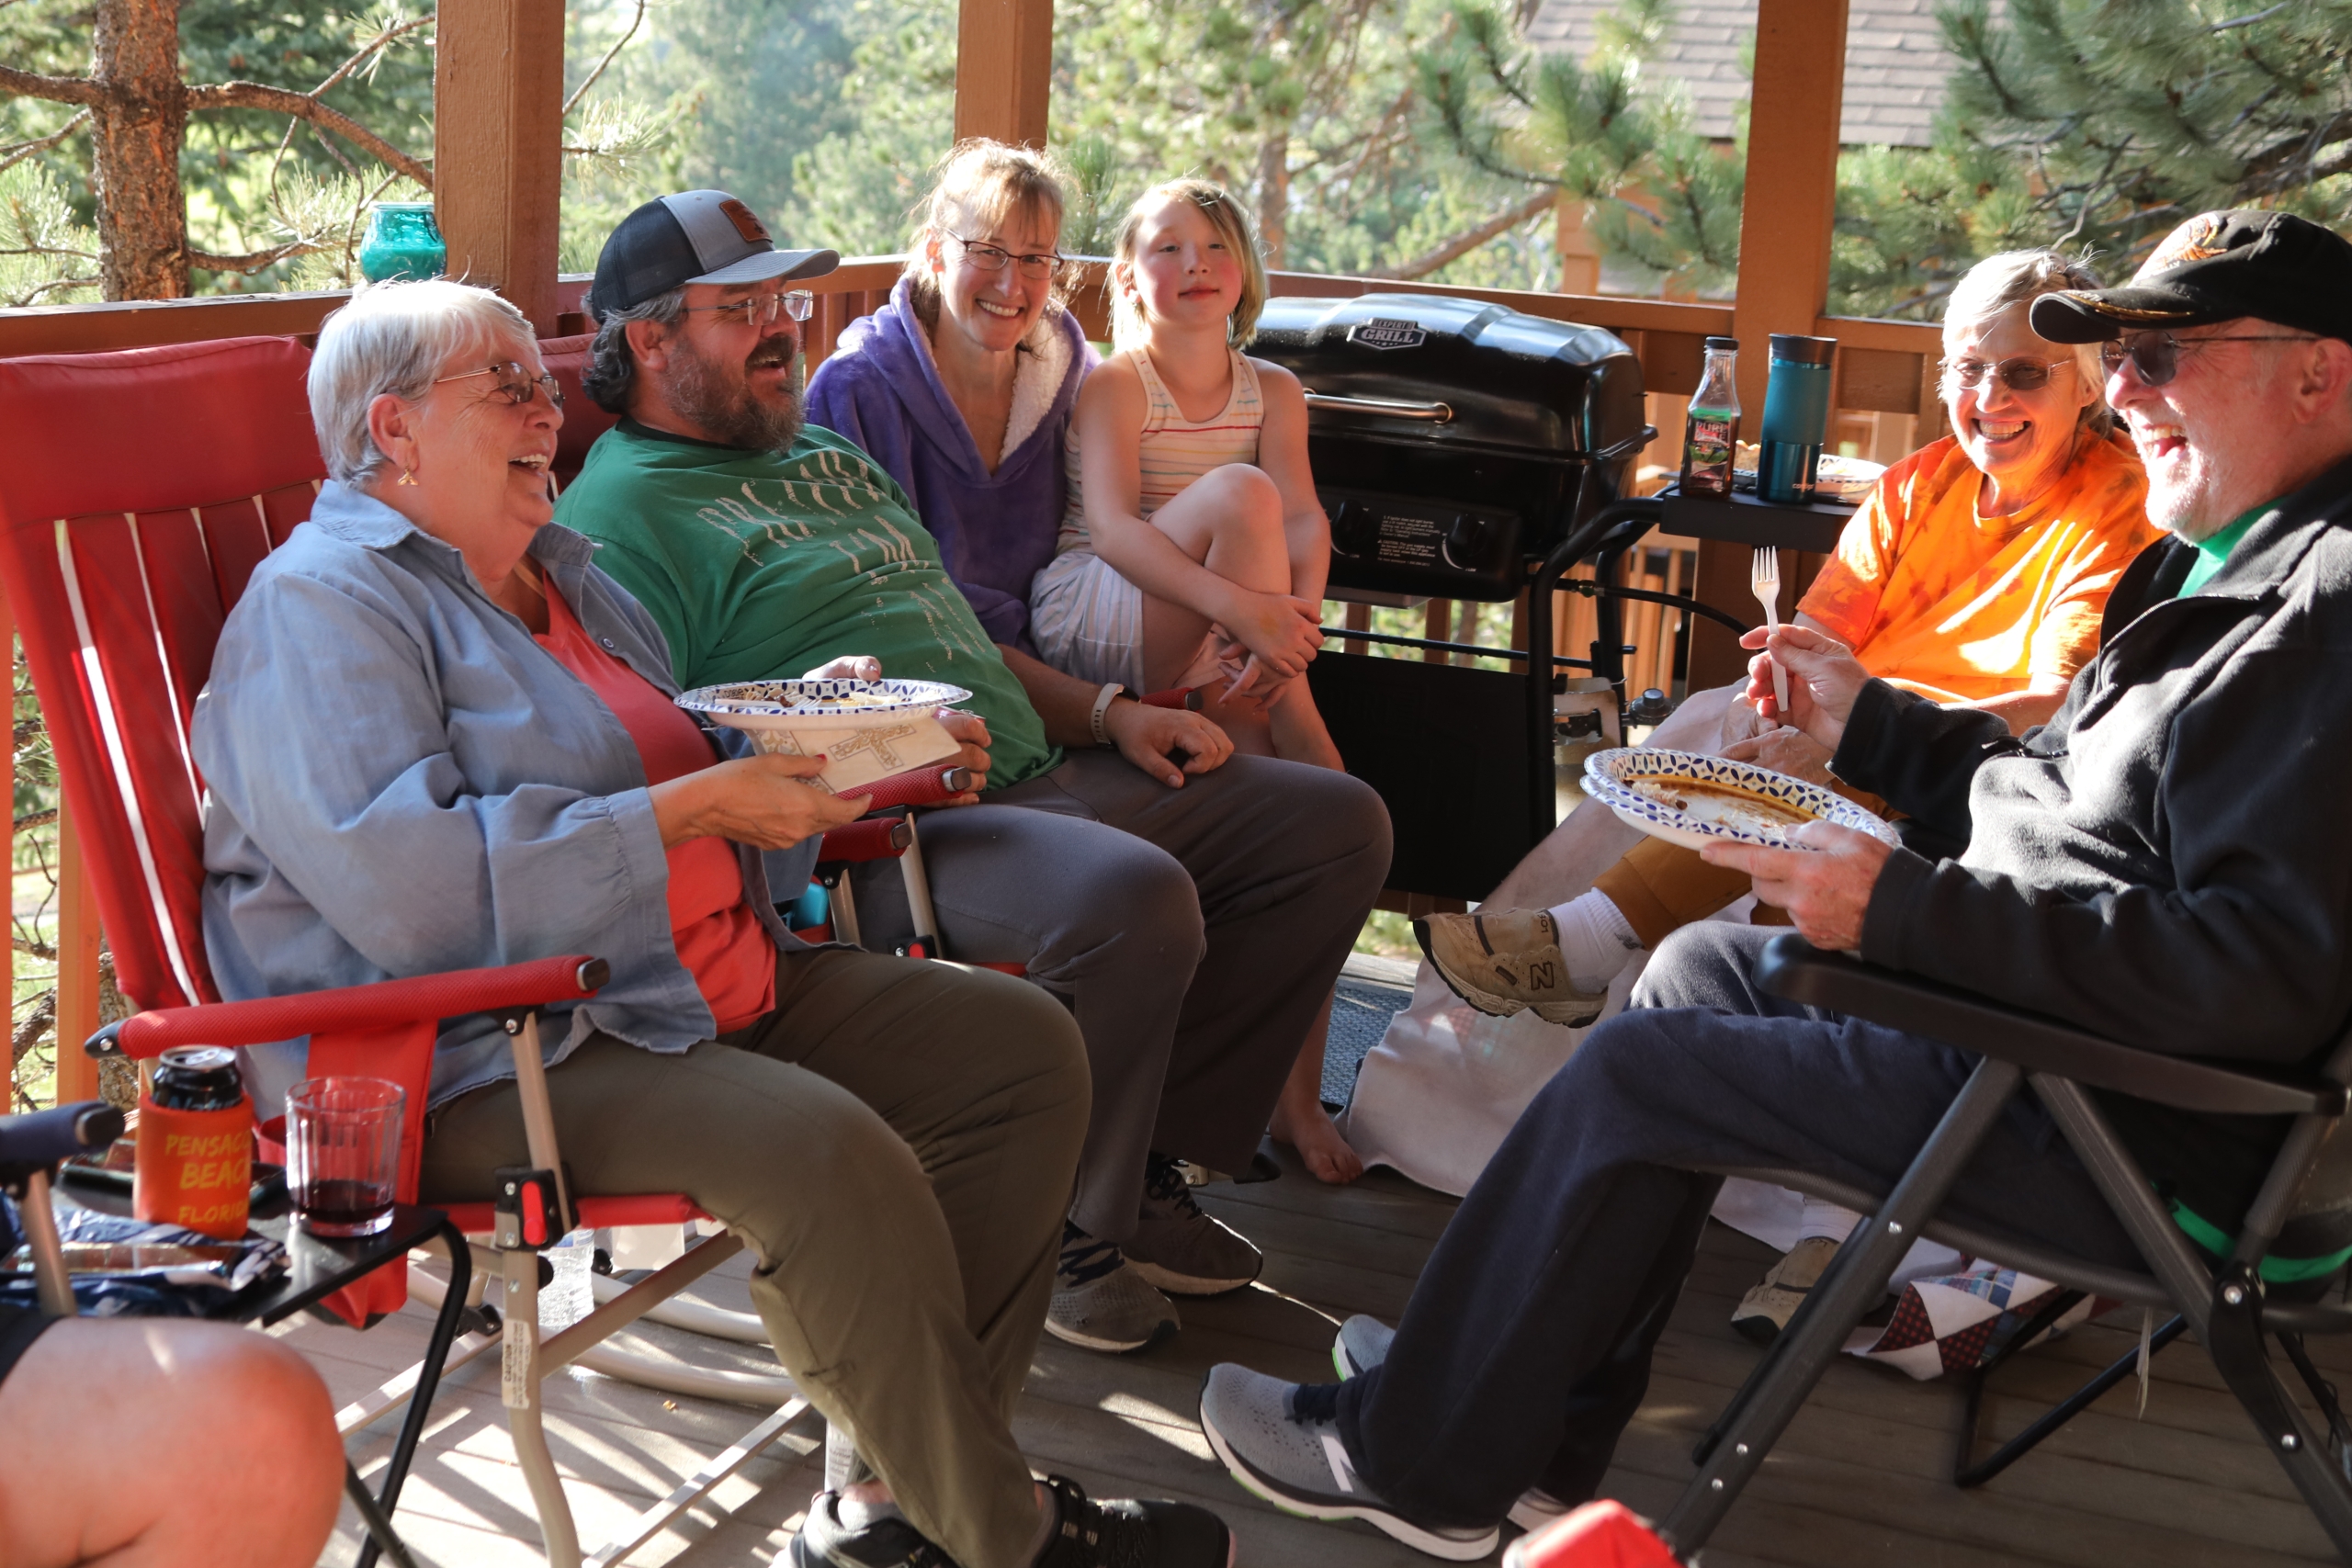 Group of adults on a porch laughing together